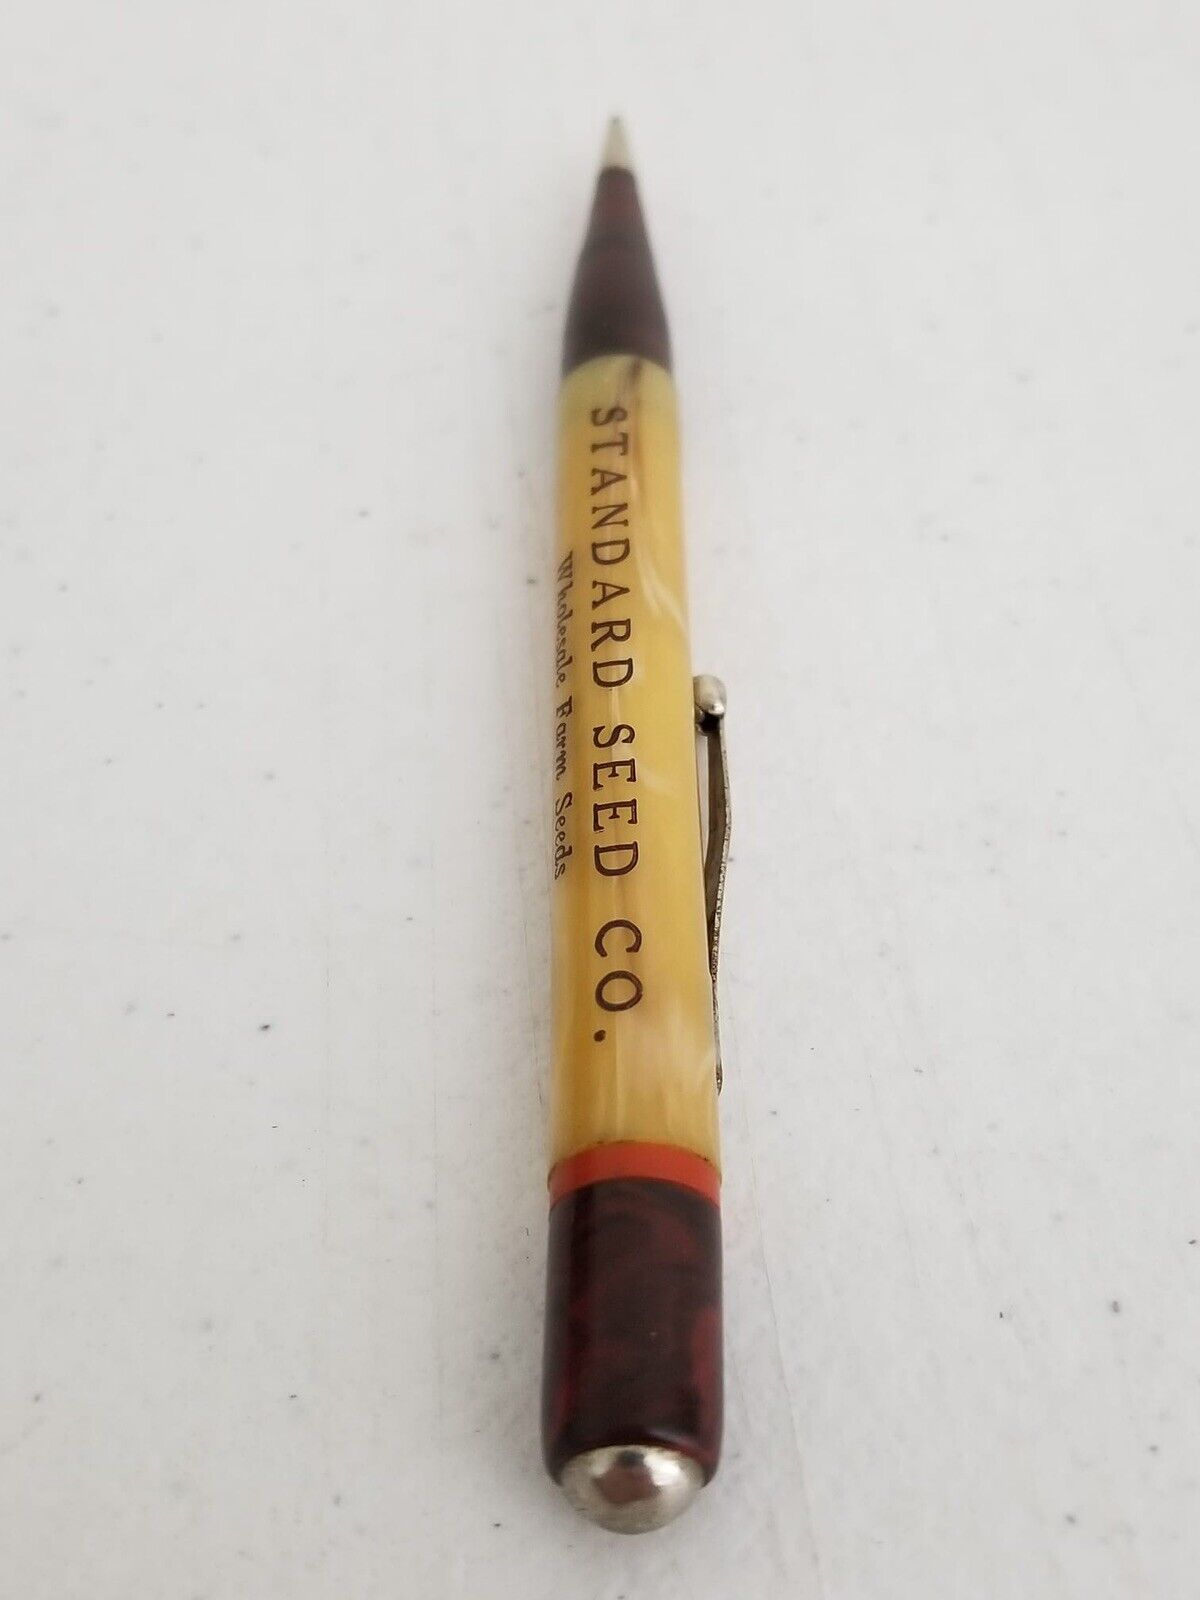 Rare Vintage Redipoint Mechanical Pencil - Collectible Standard Seed Co. Advertising - TreasuTiques